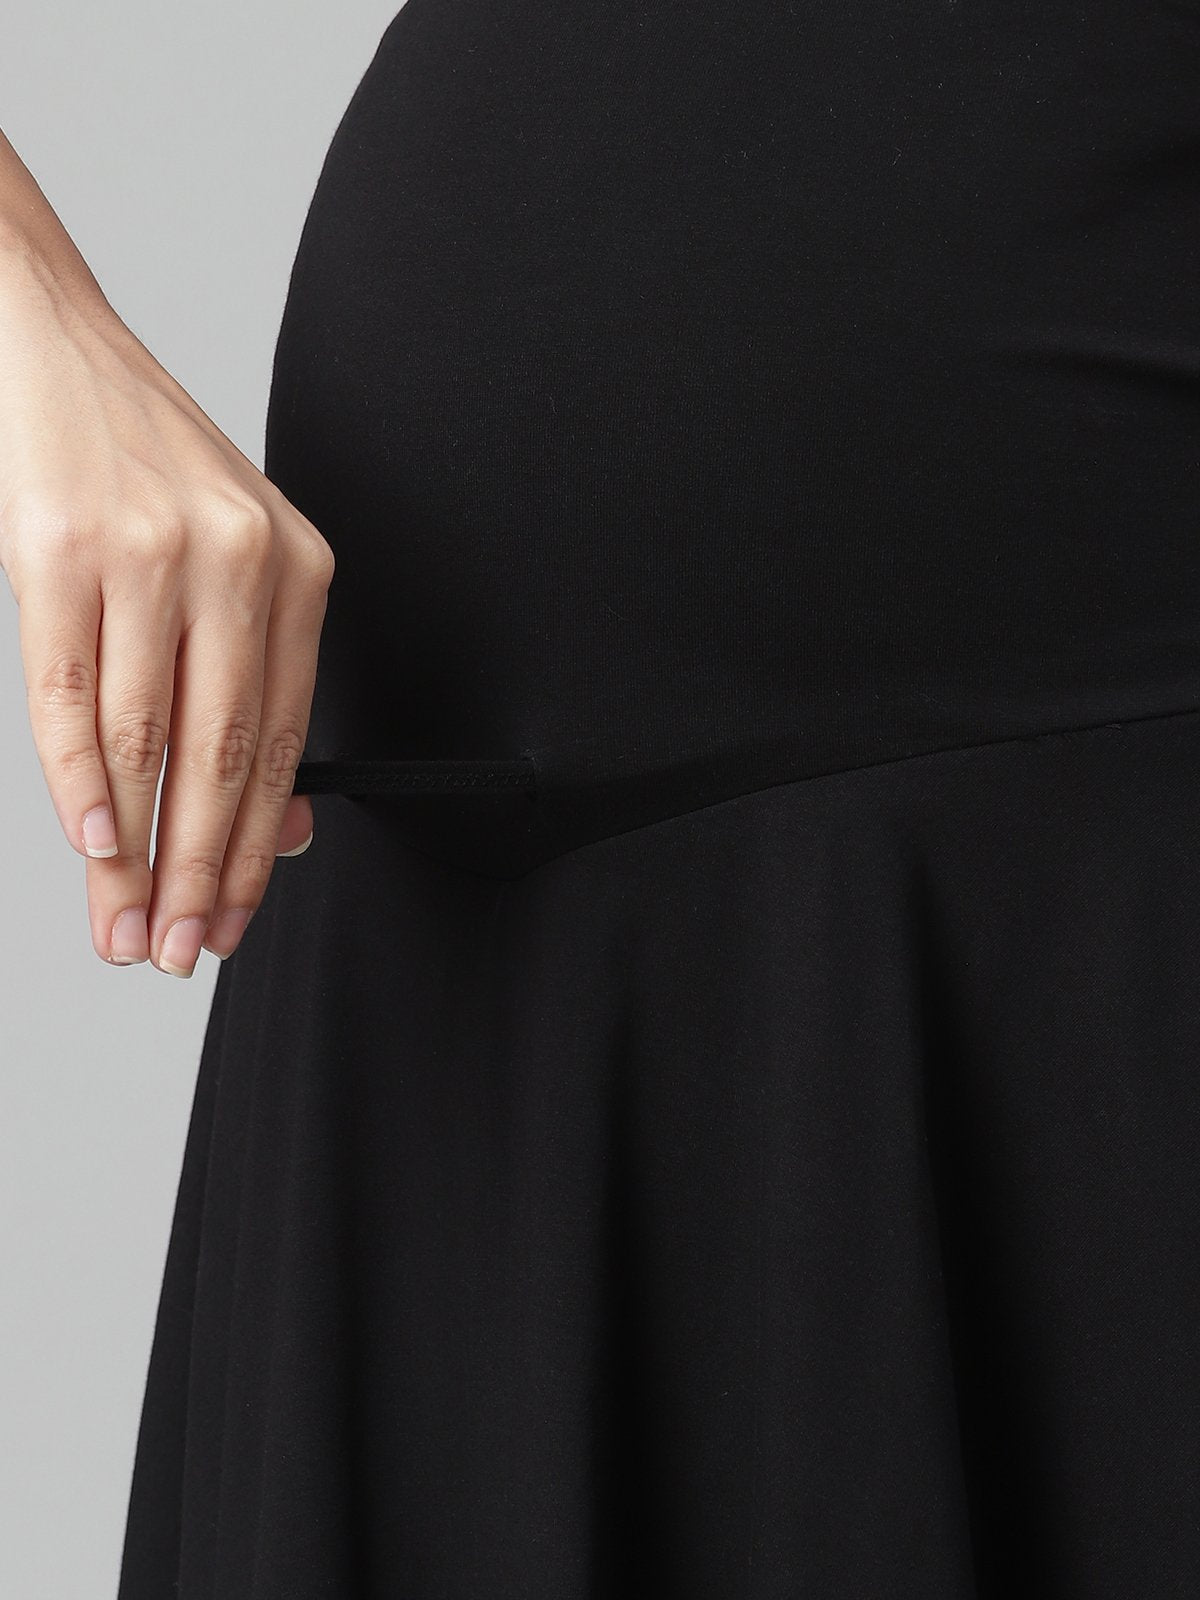 Maternity Skirts  Buy Maternity Clothes Online Australia THE ICONIC